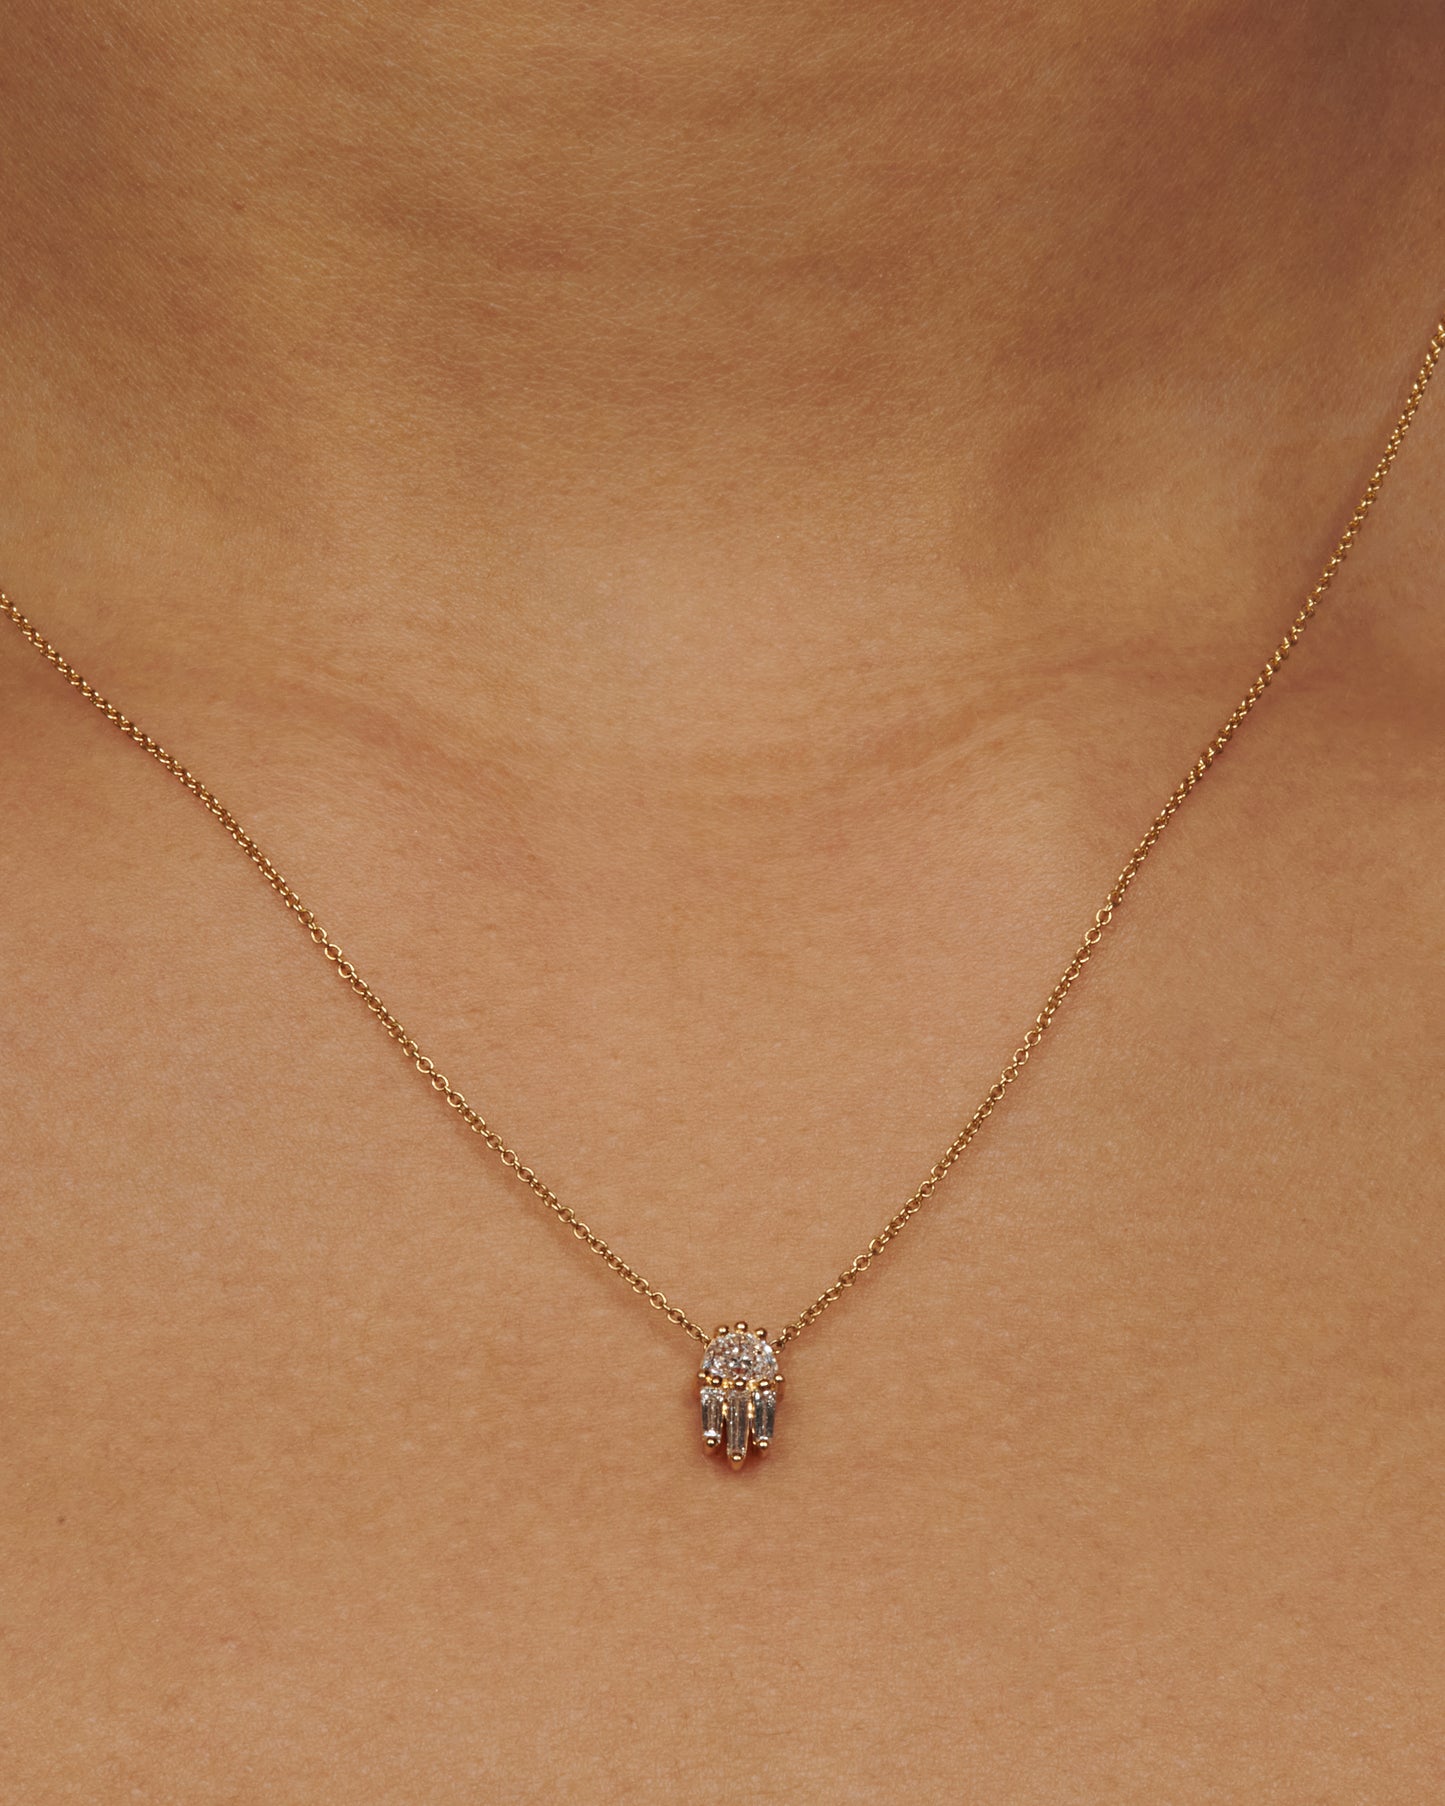 A diamond pendant necklace with a half moon and three tapered baguette diamonds.